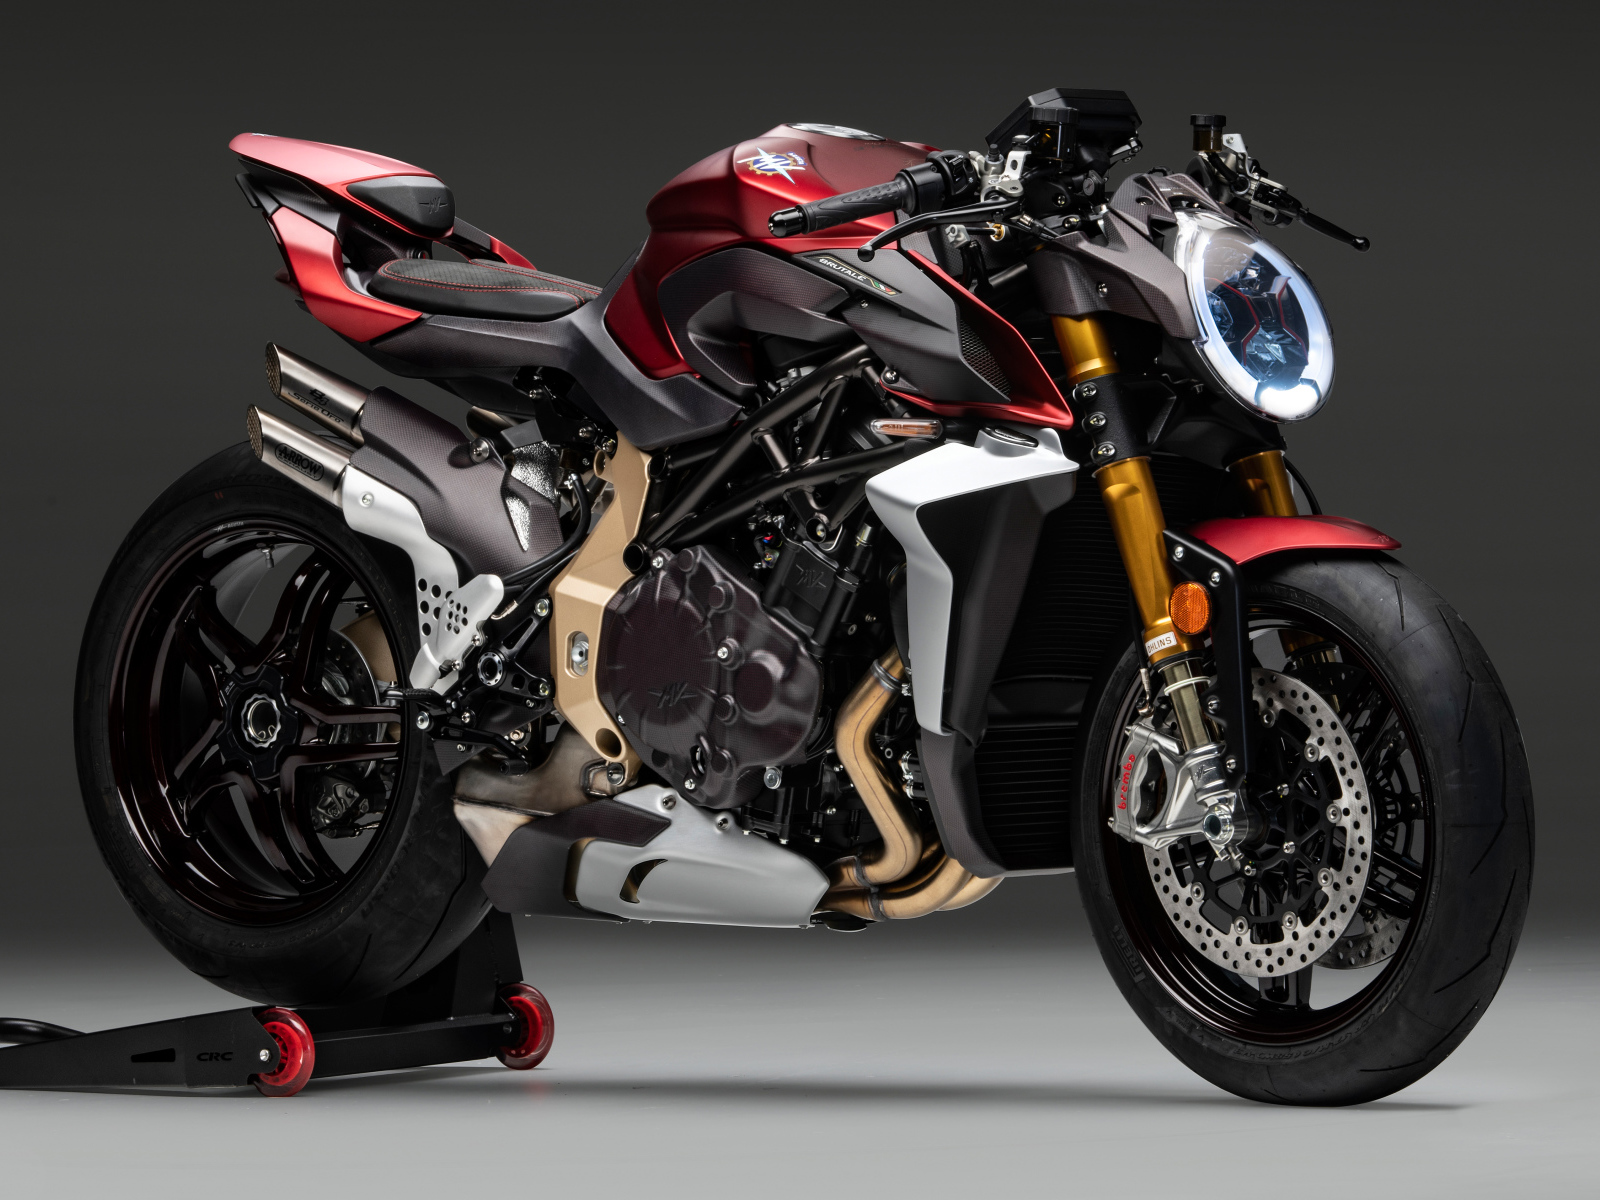 Motorcycle Agusta Brutale 1000 Serie Oro 2019 on a gray background